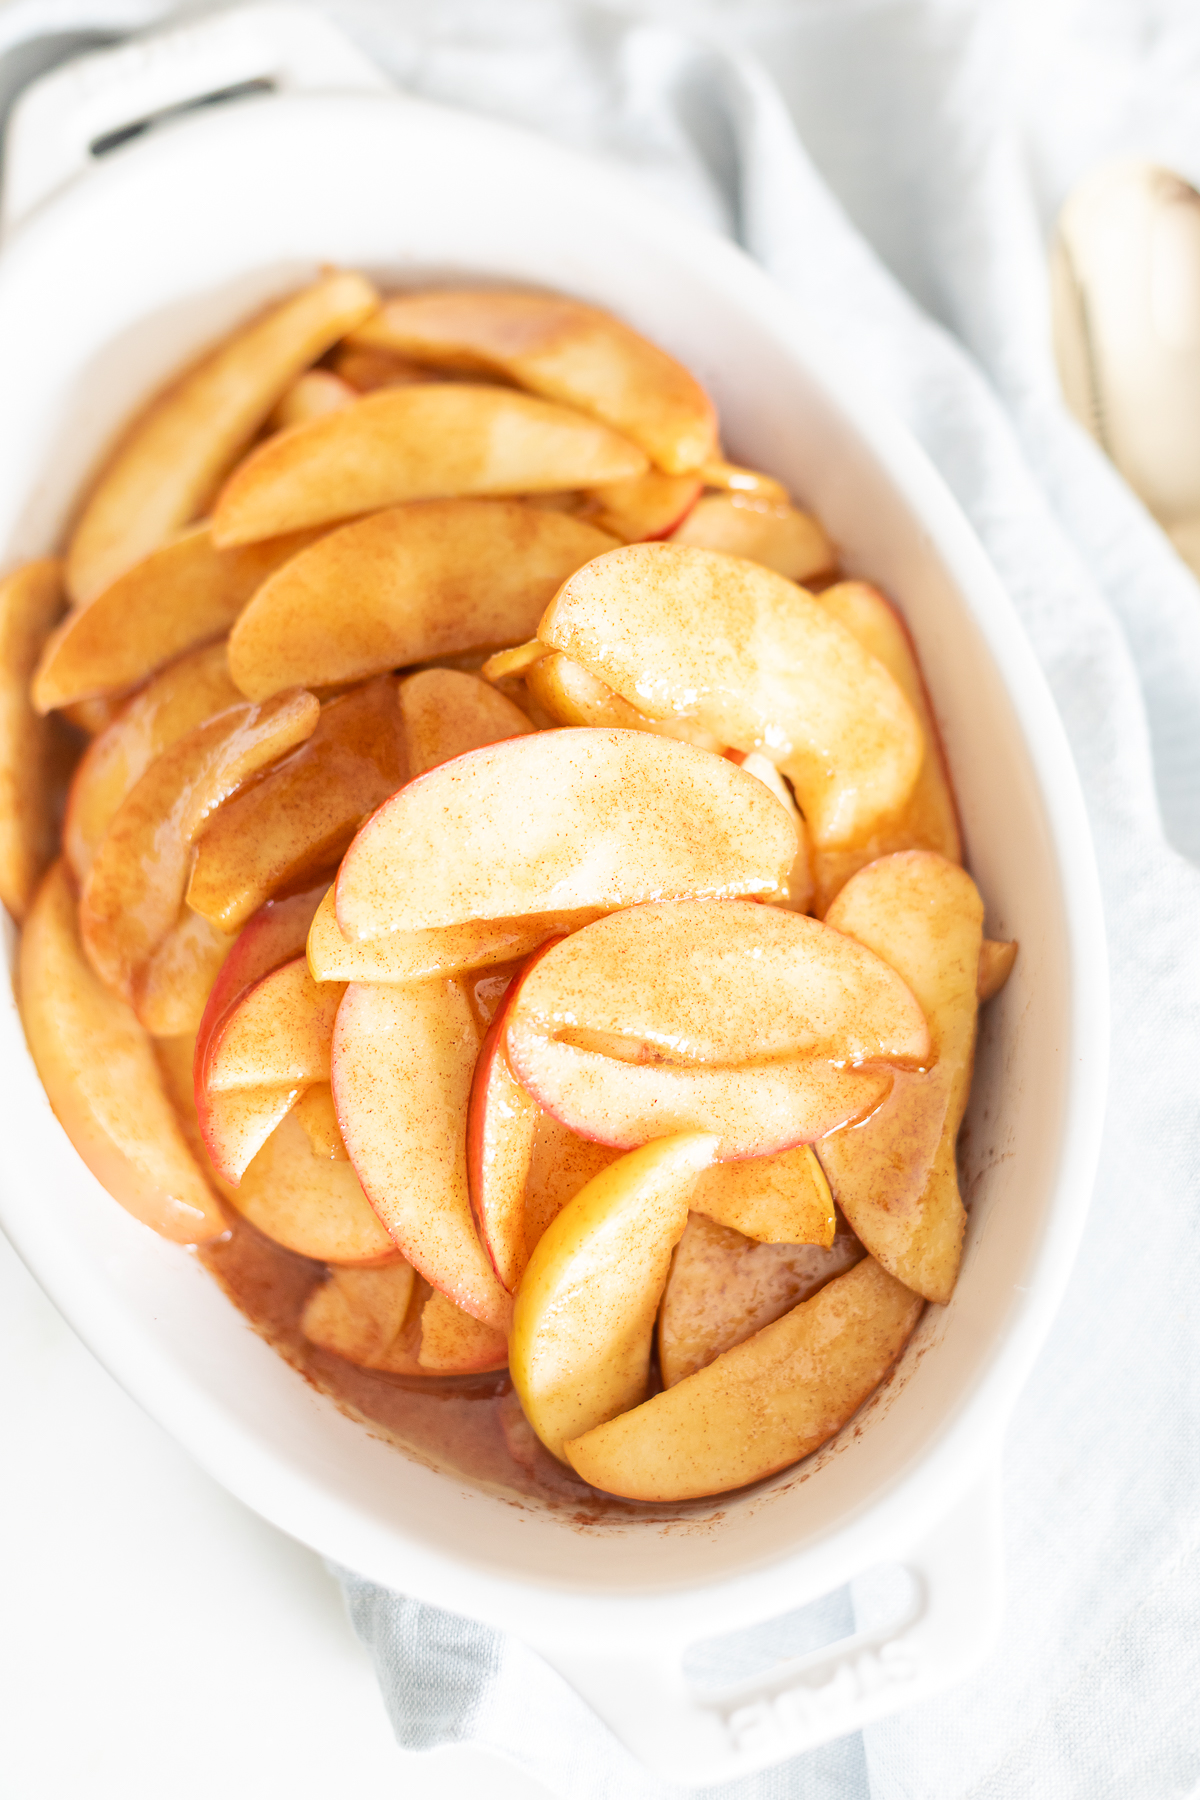 Baked apple slices arranged in a white dish with a spoon.